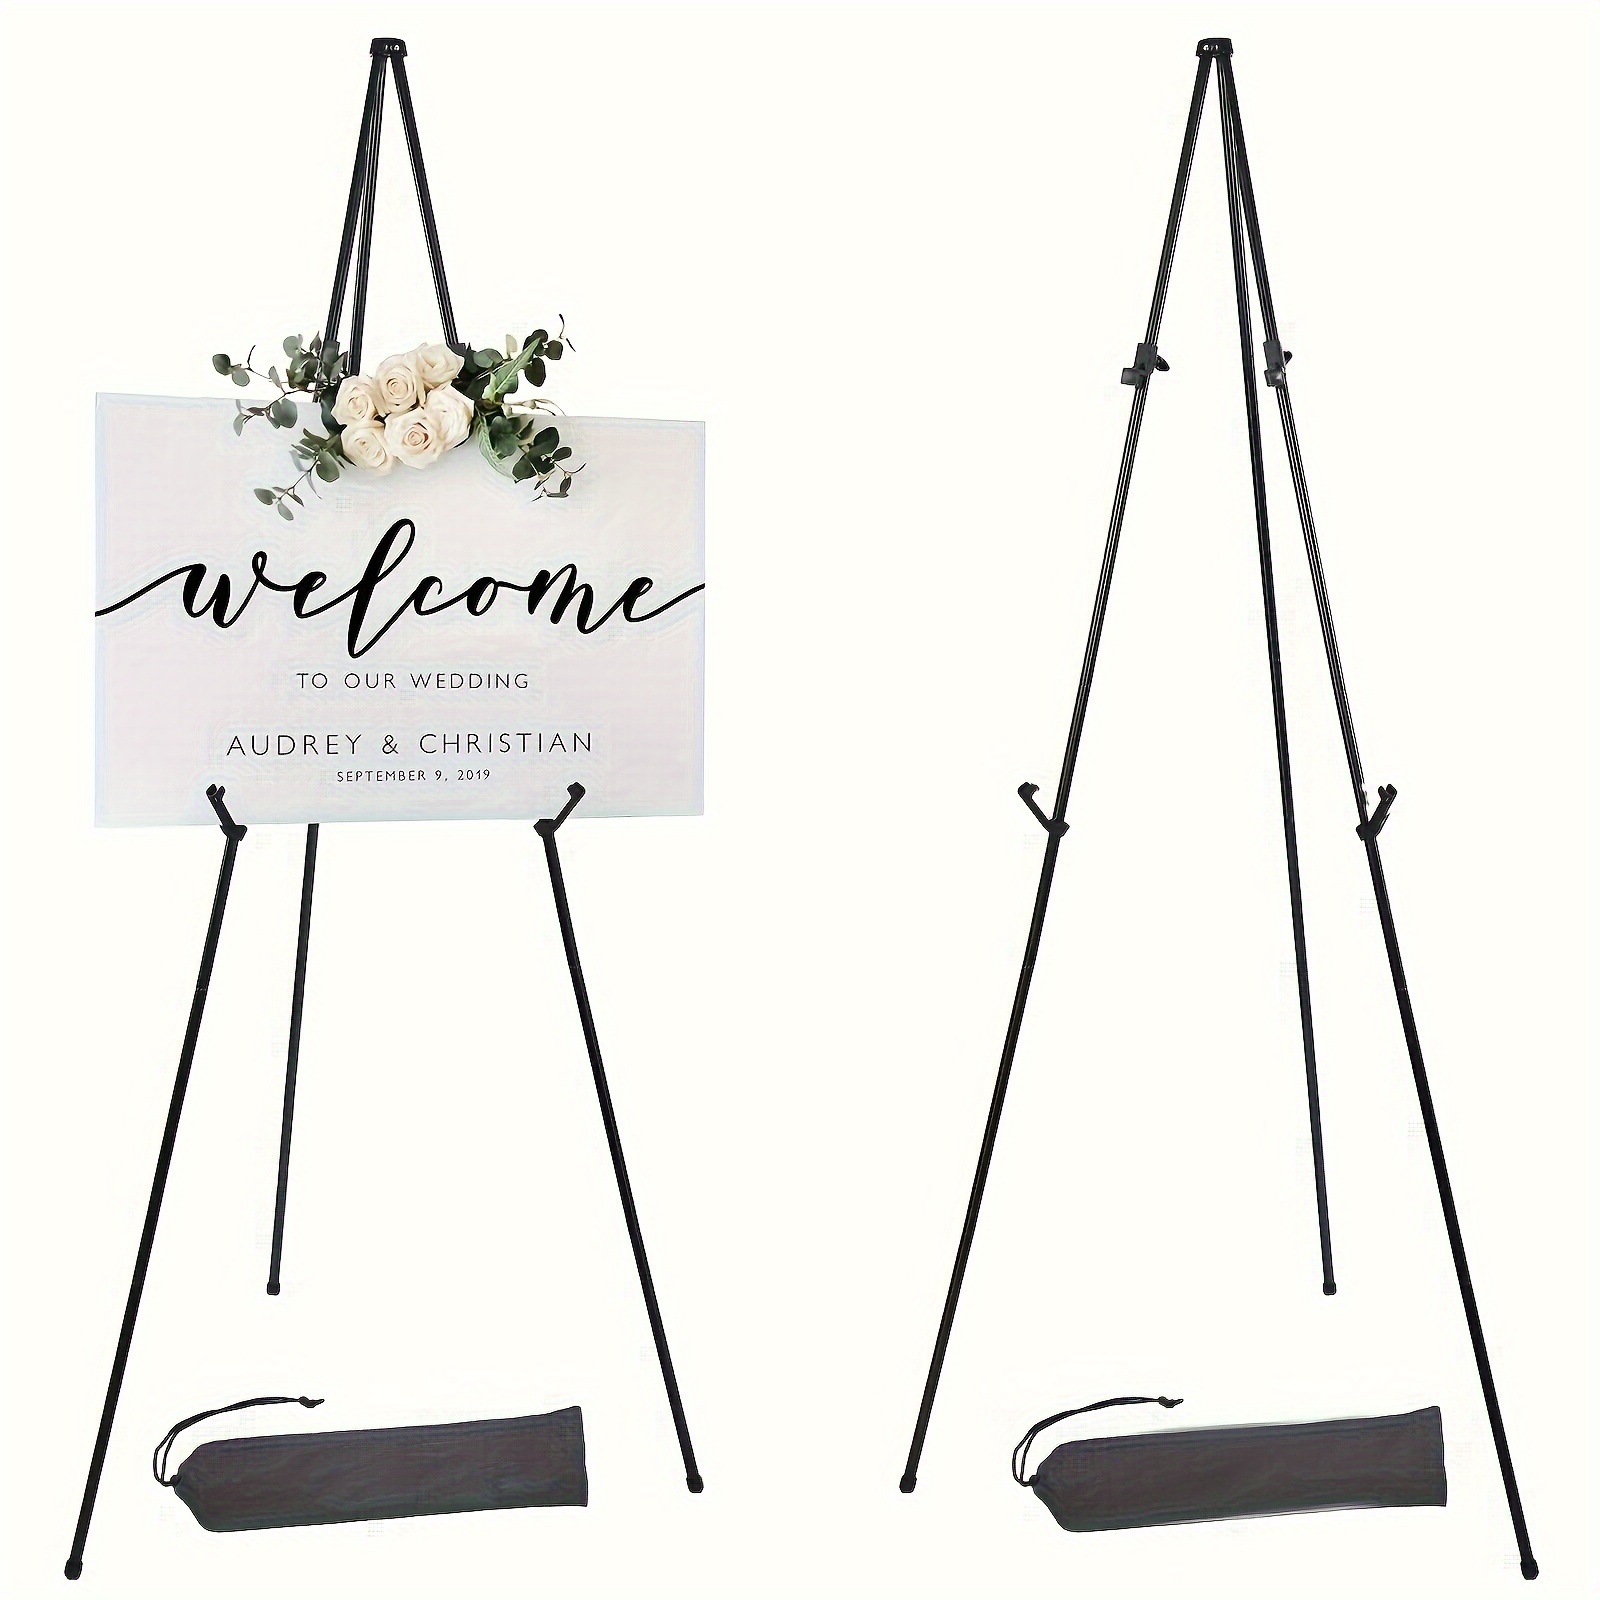 

Adjustable 63" Black Metal Easel Stand - Portable Folding Display For Art, Posters & Wedding Signs With Carry Bag, Holds Up To 5 Lbs